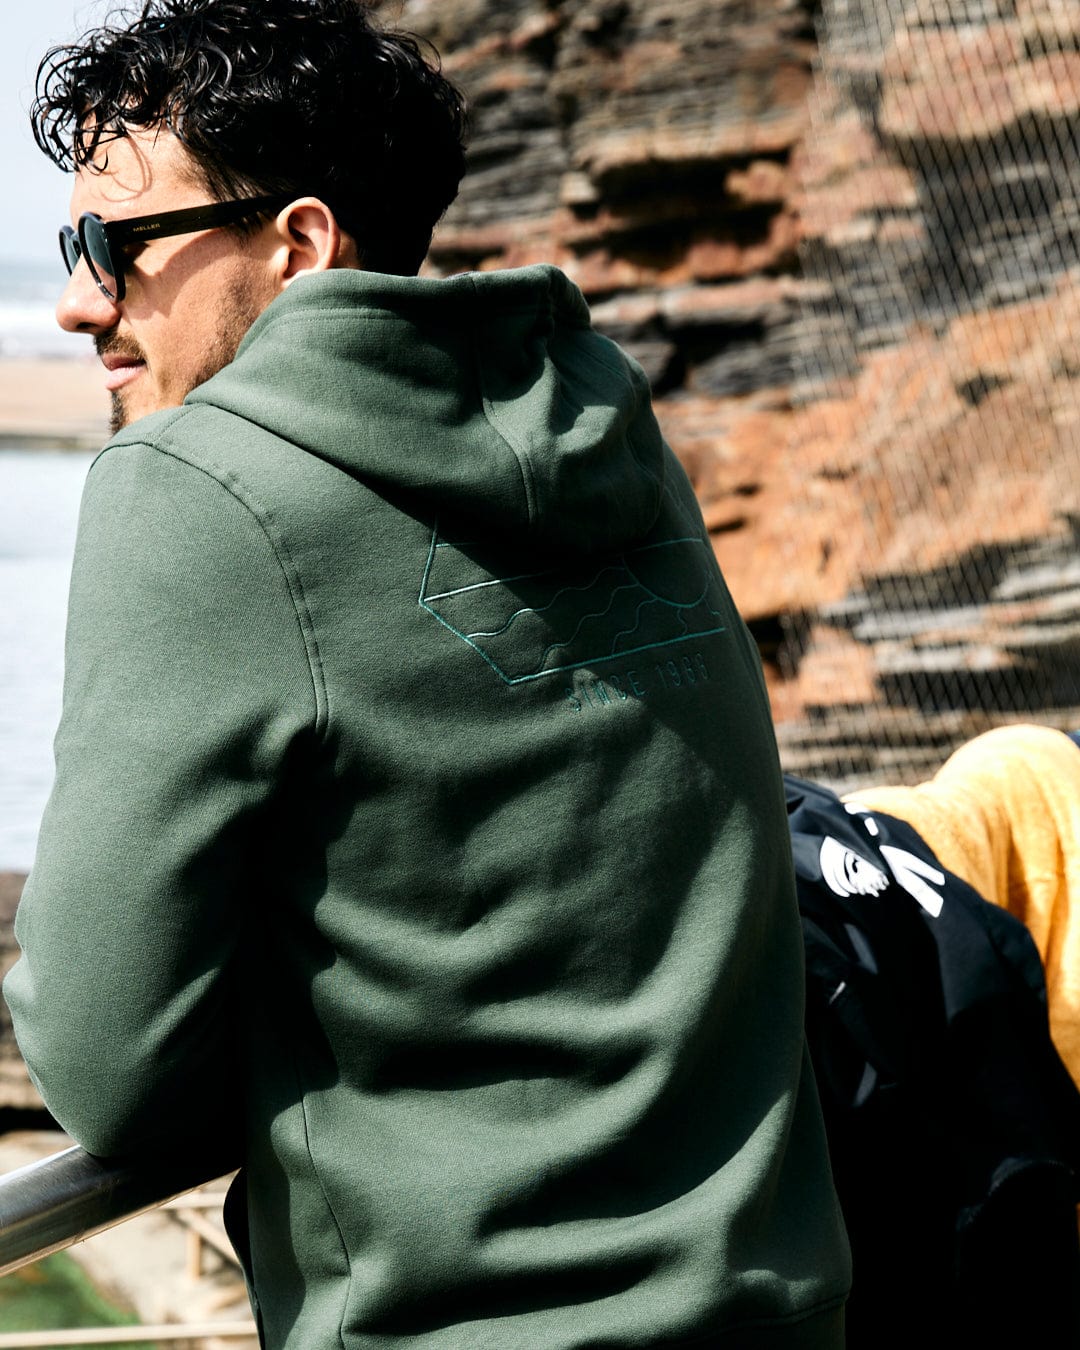 Man in Vantage Outline - Recycled Mens Zip Hoodie in Dark Green by Saltrock and sunglasses, looking away from the camera, standing by a railing with water and rocks in the background.